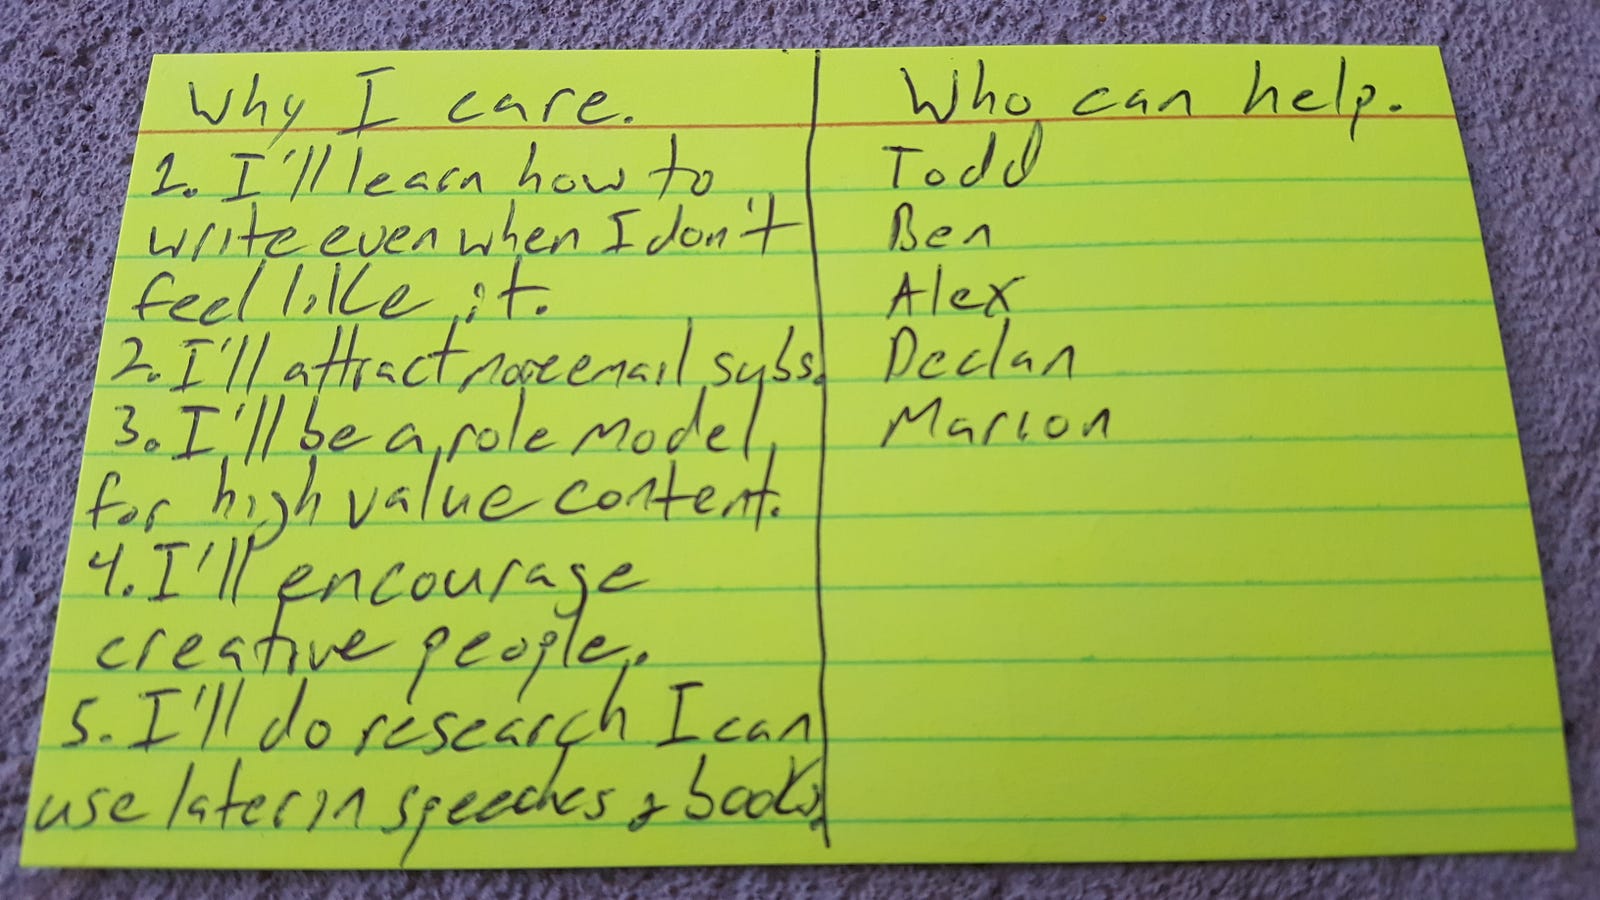 Notecard with 5 names written beneath the headline "Who can help."